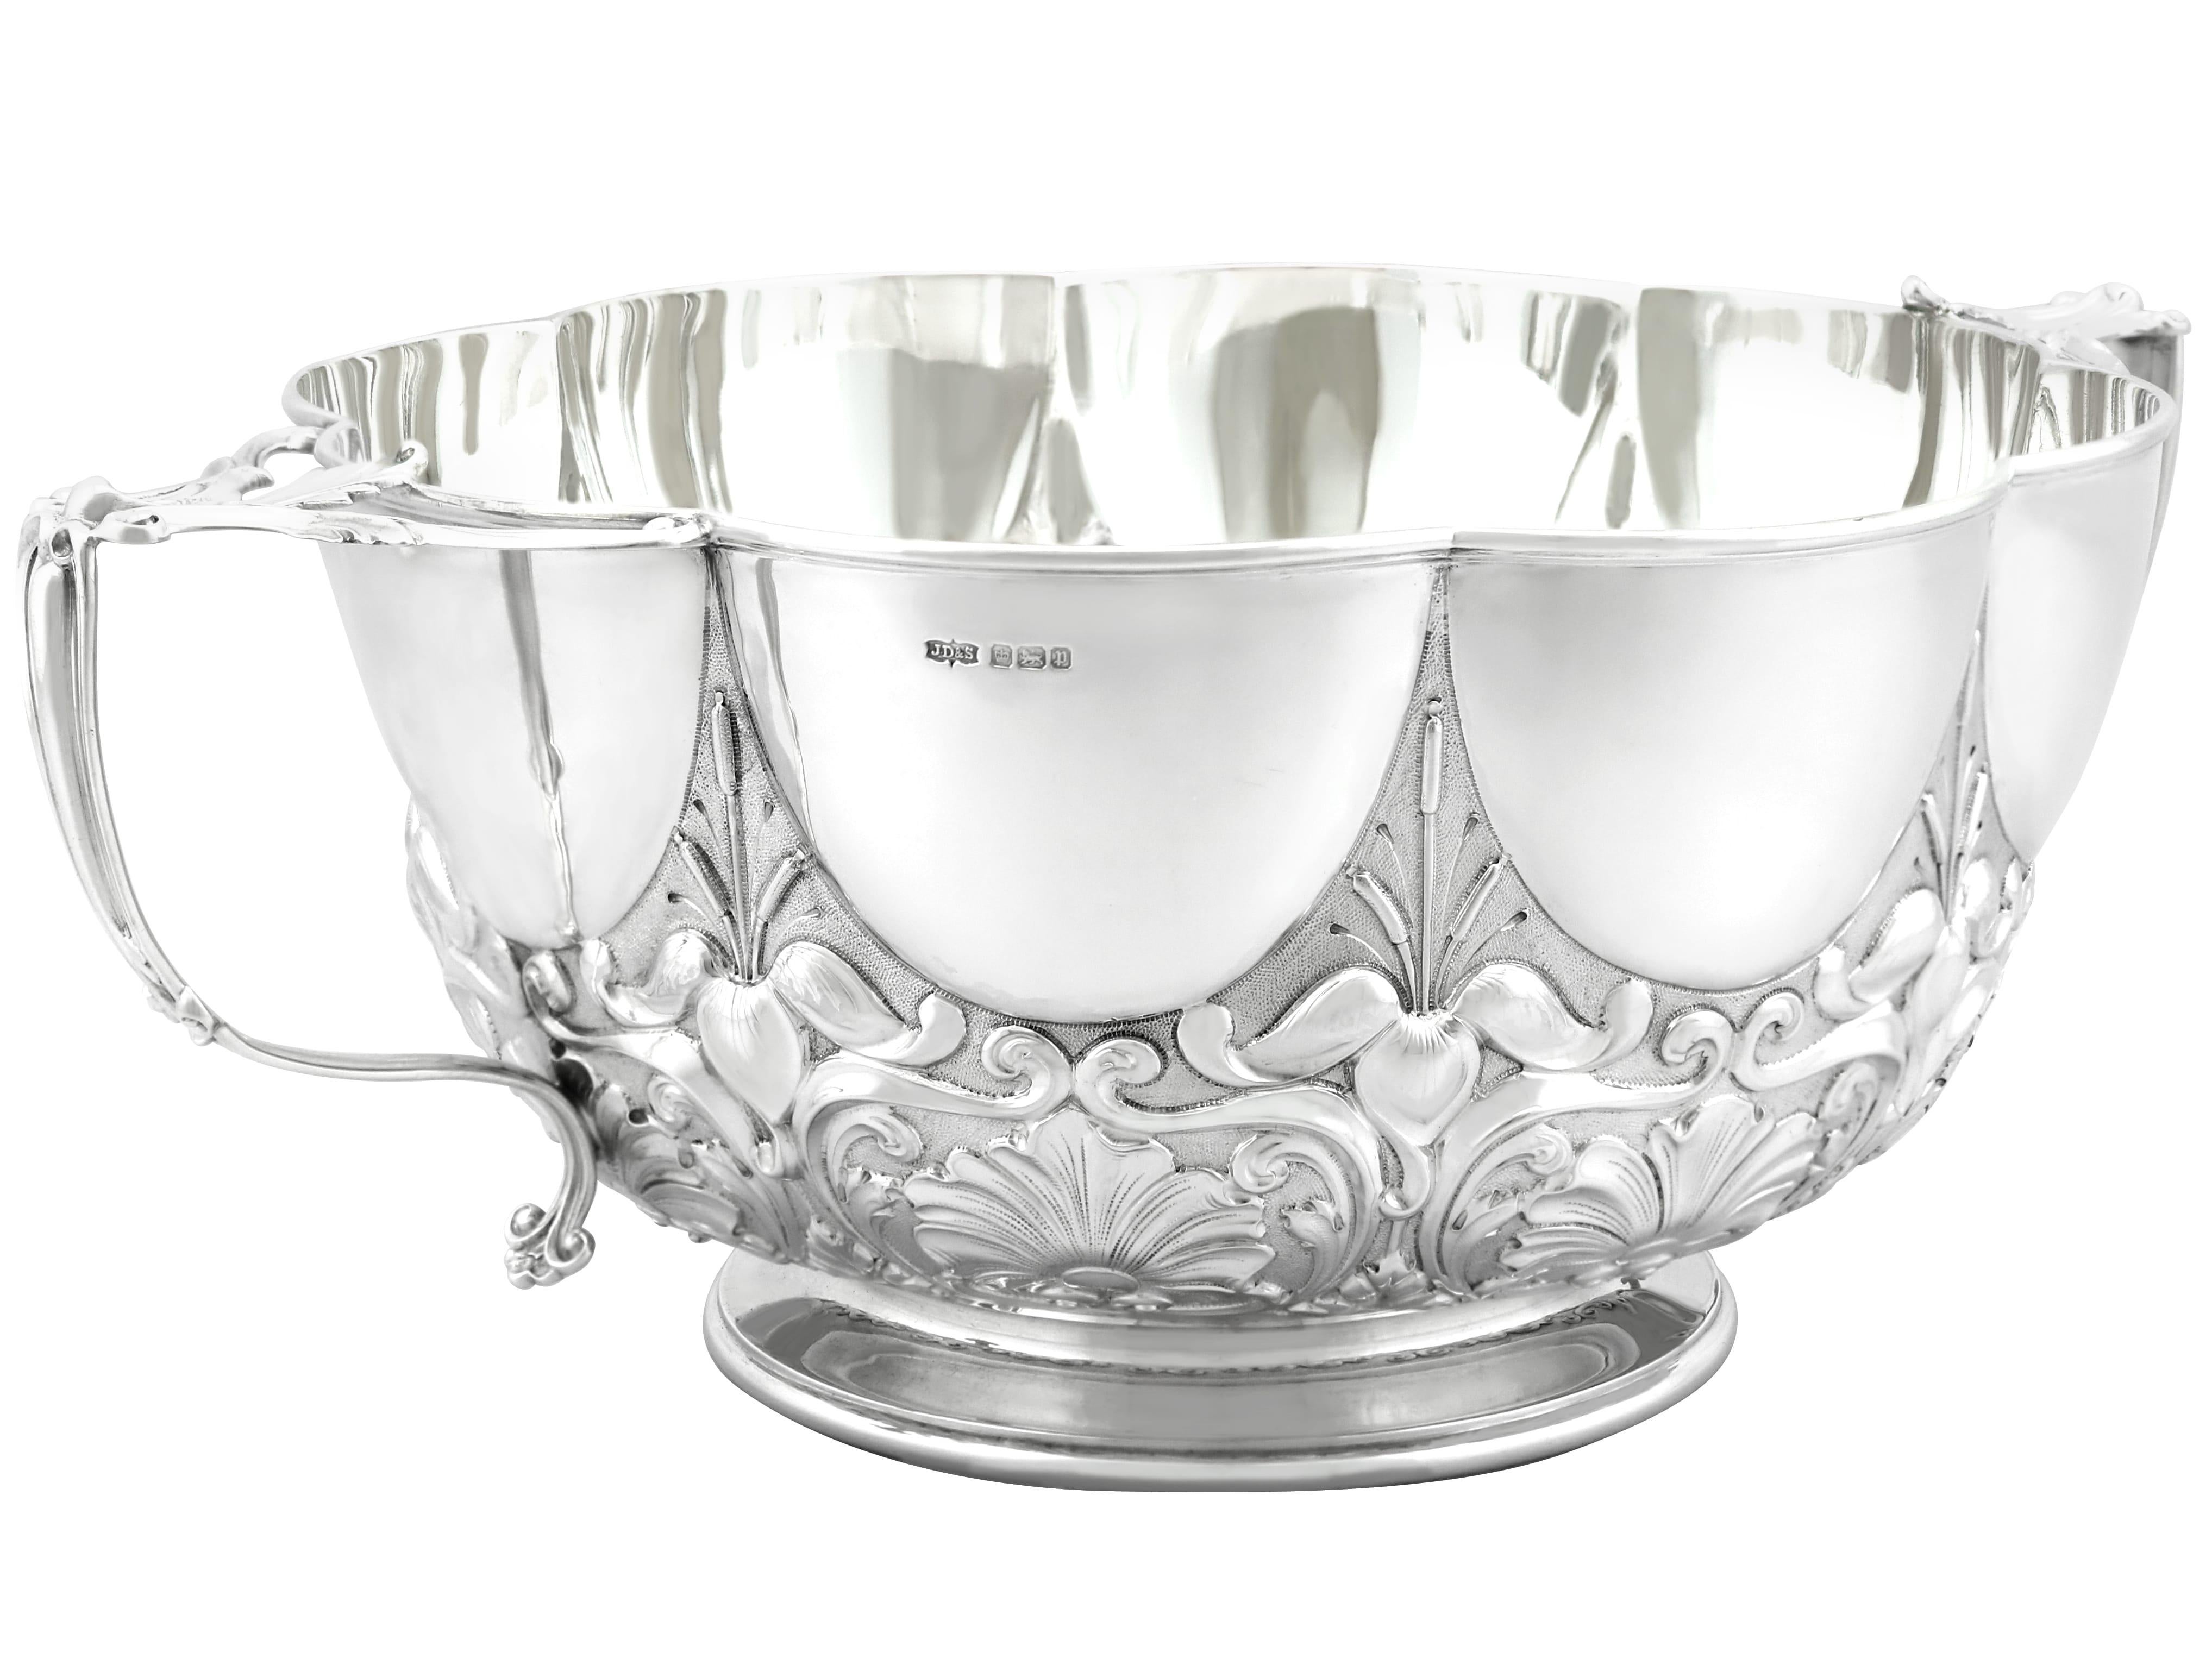 Edwardian English Sterling Silver Bowl Art Nouveau Style In Excellent Condition For Sale In Jesmond, Newcastle Upon Tyne